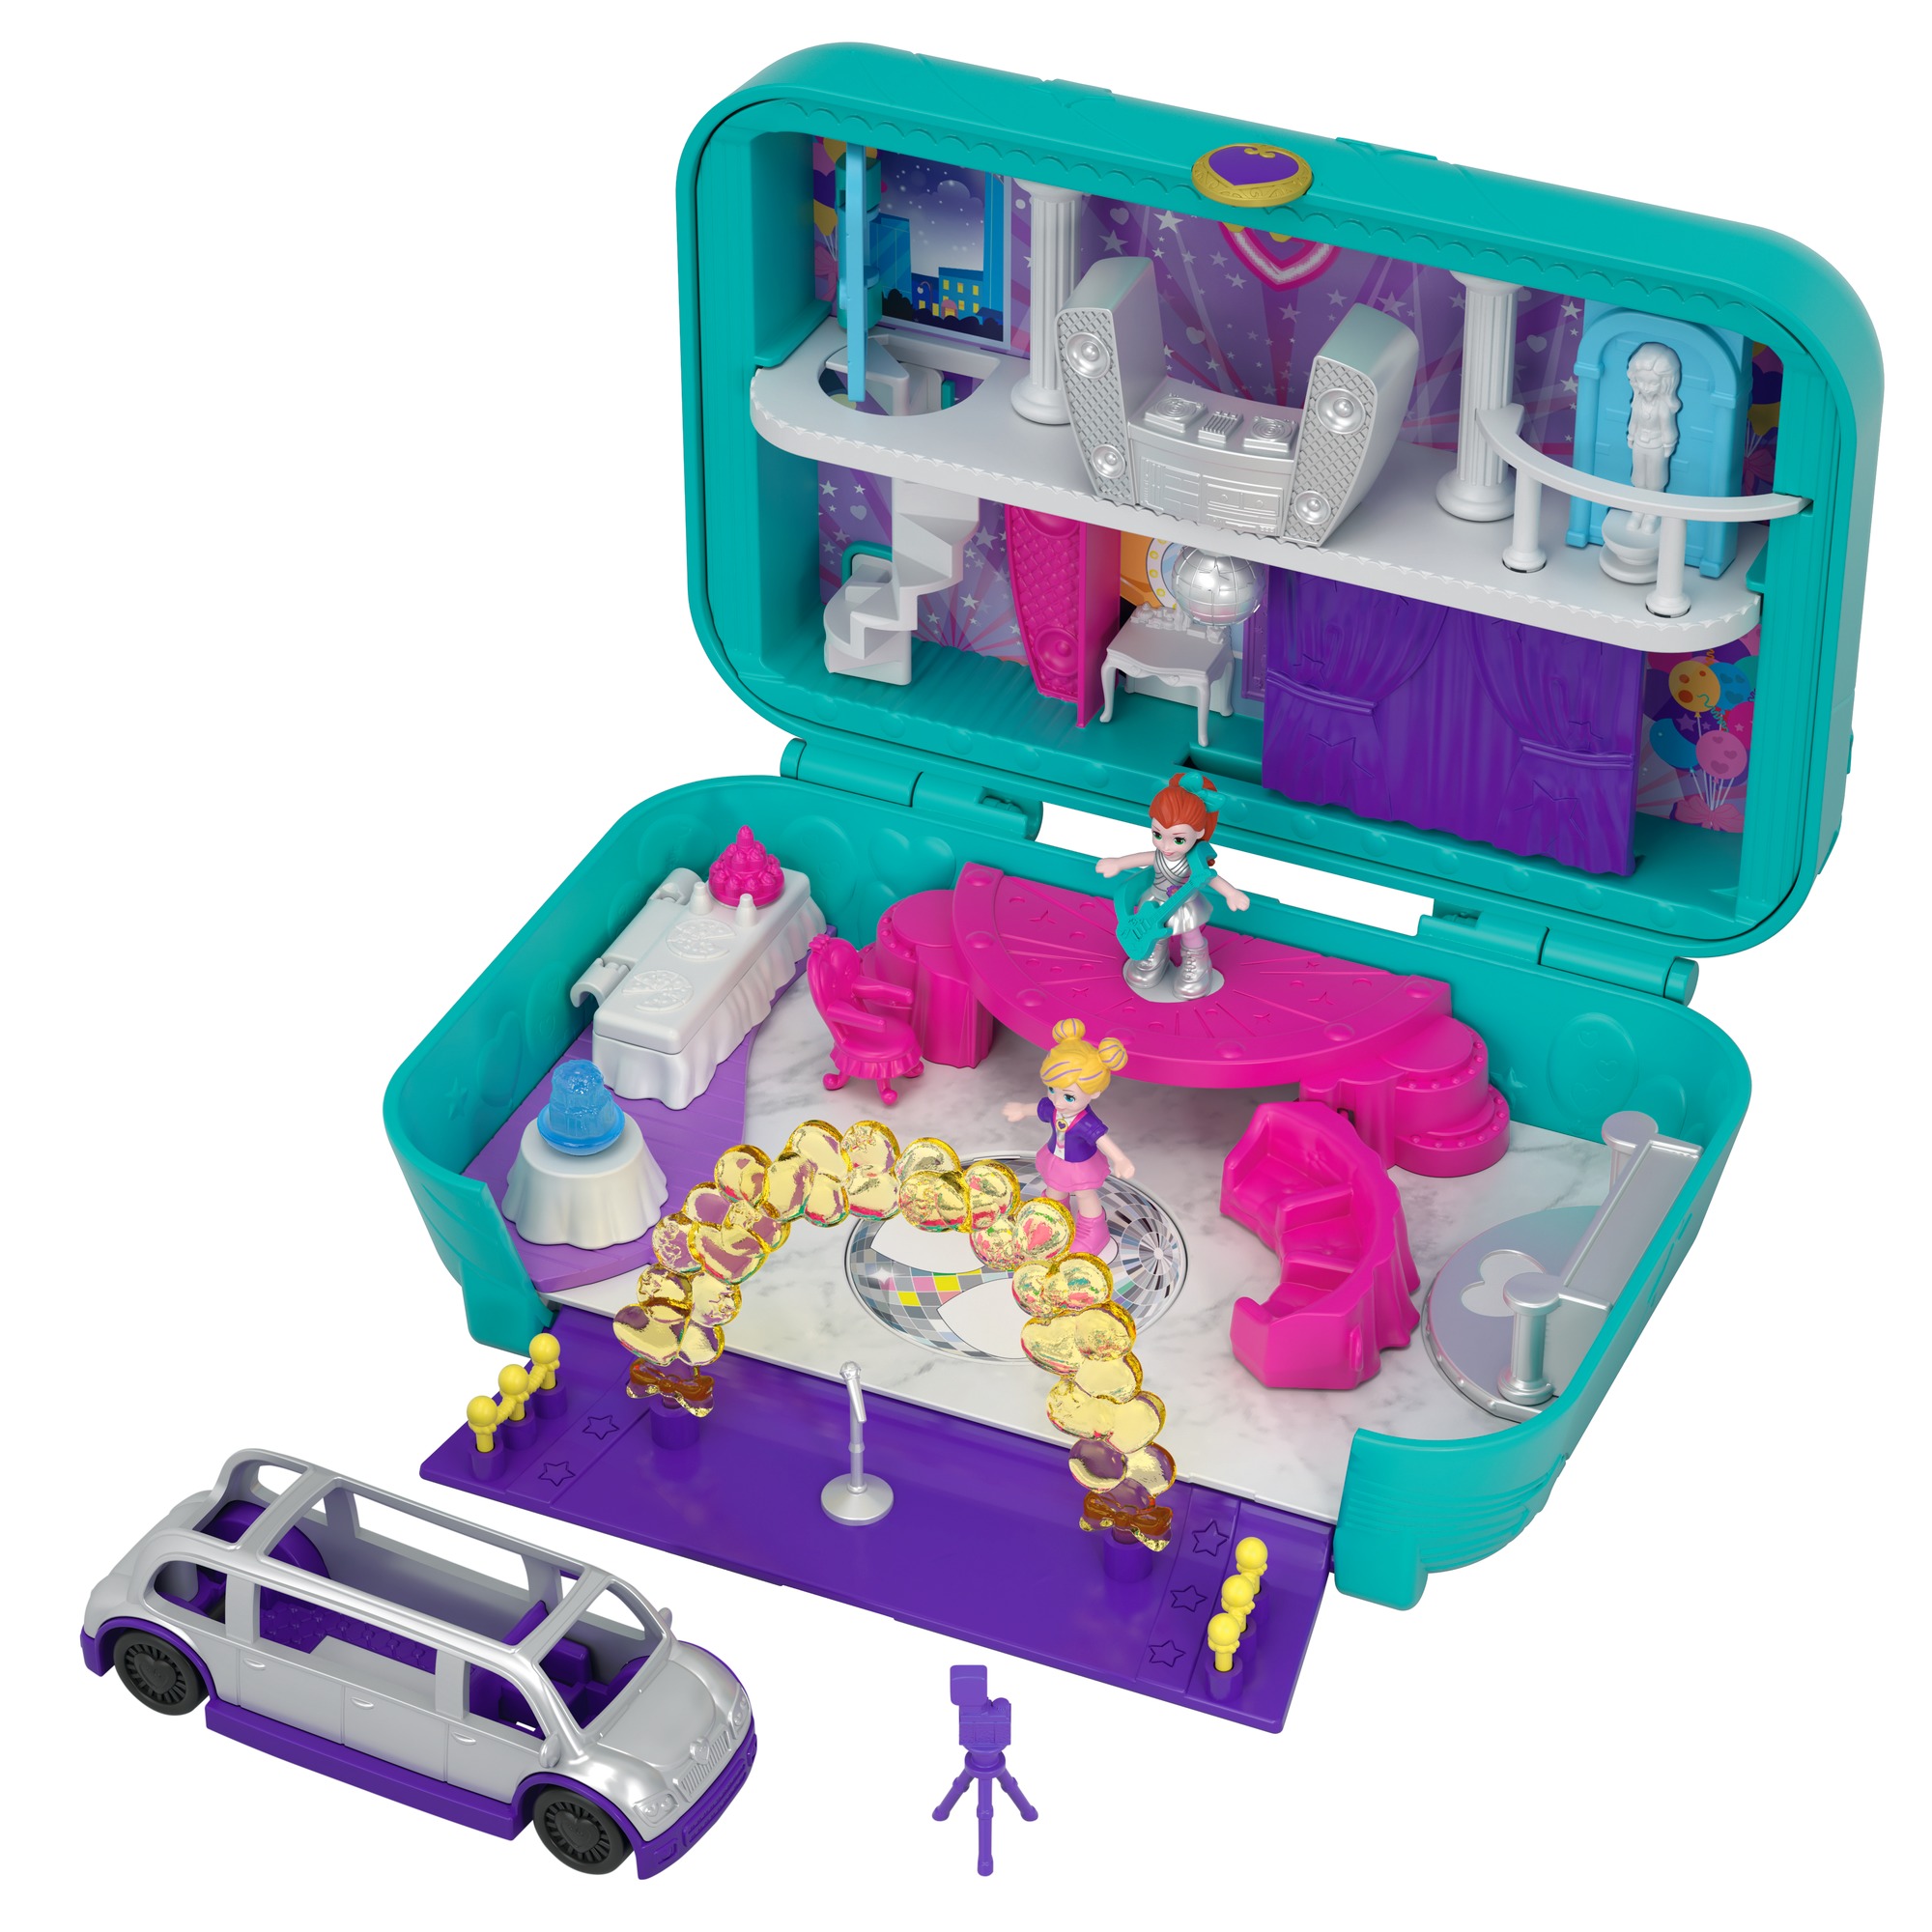 Polly Pocket Hidden Places Dance Par-taay! Compact with Accessories - image 1 of 10